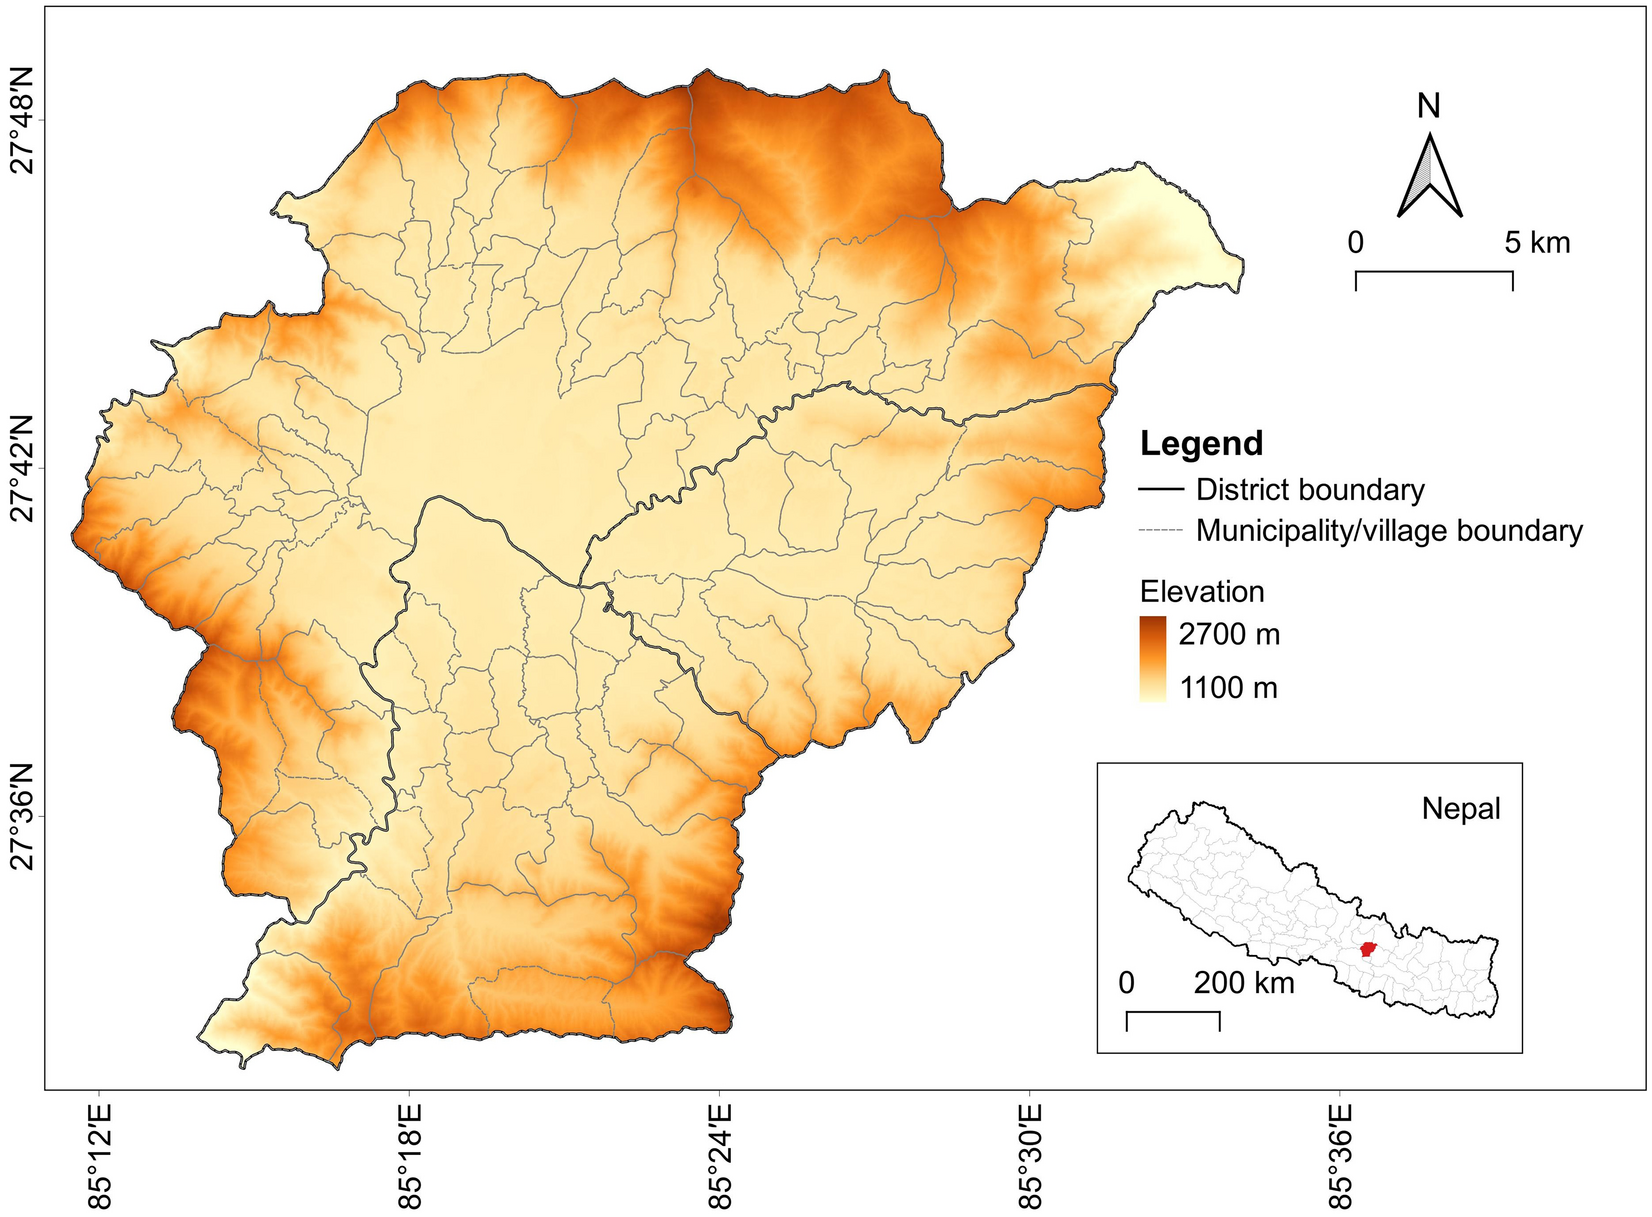 Urban growth modelling and social vulnerability assessment for a hazardous  Kathmandu Valley | Scientific Reports